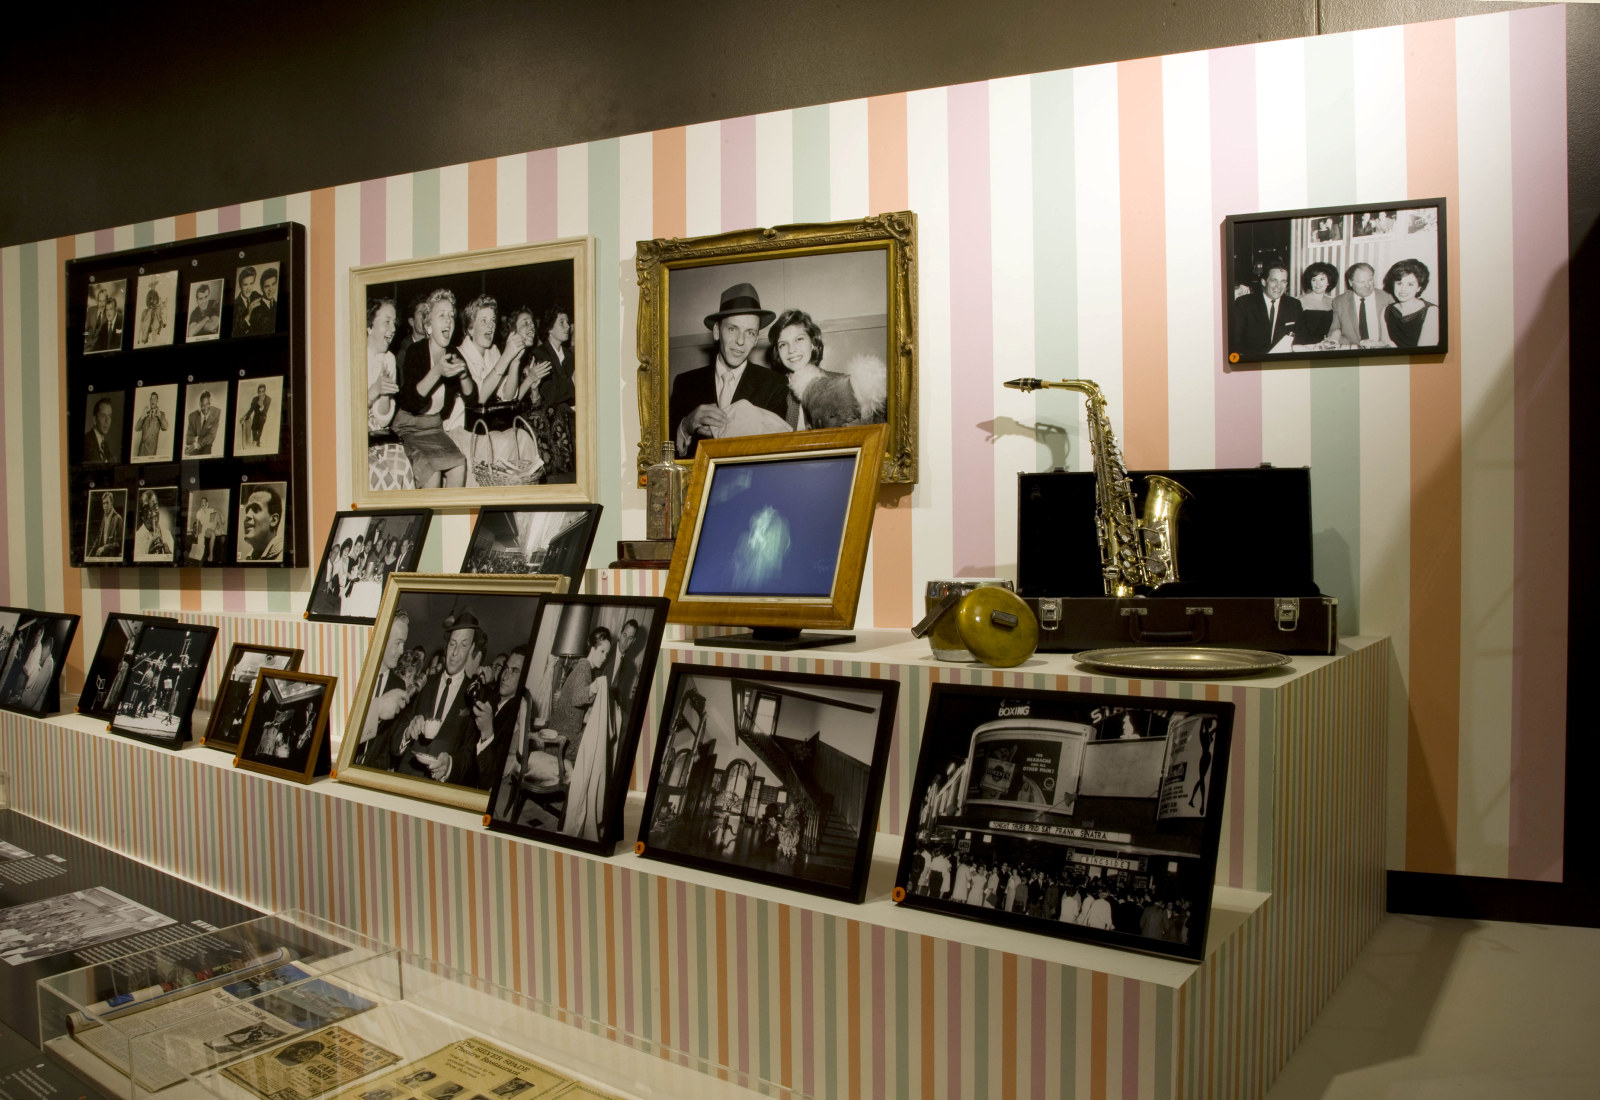 Interior of exhibition with displays cases and framed photographs.